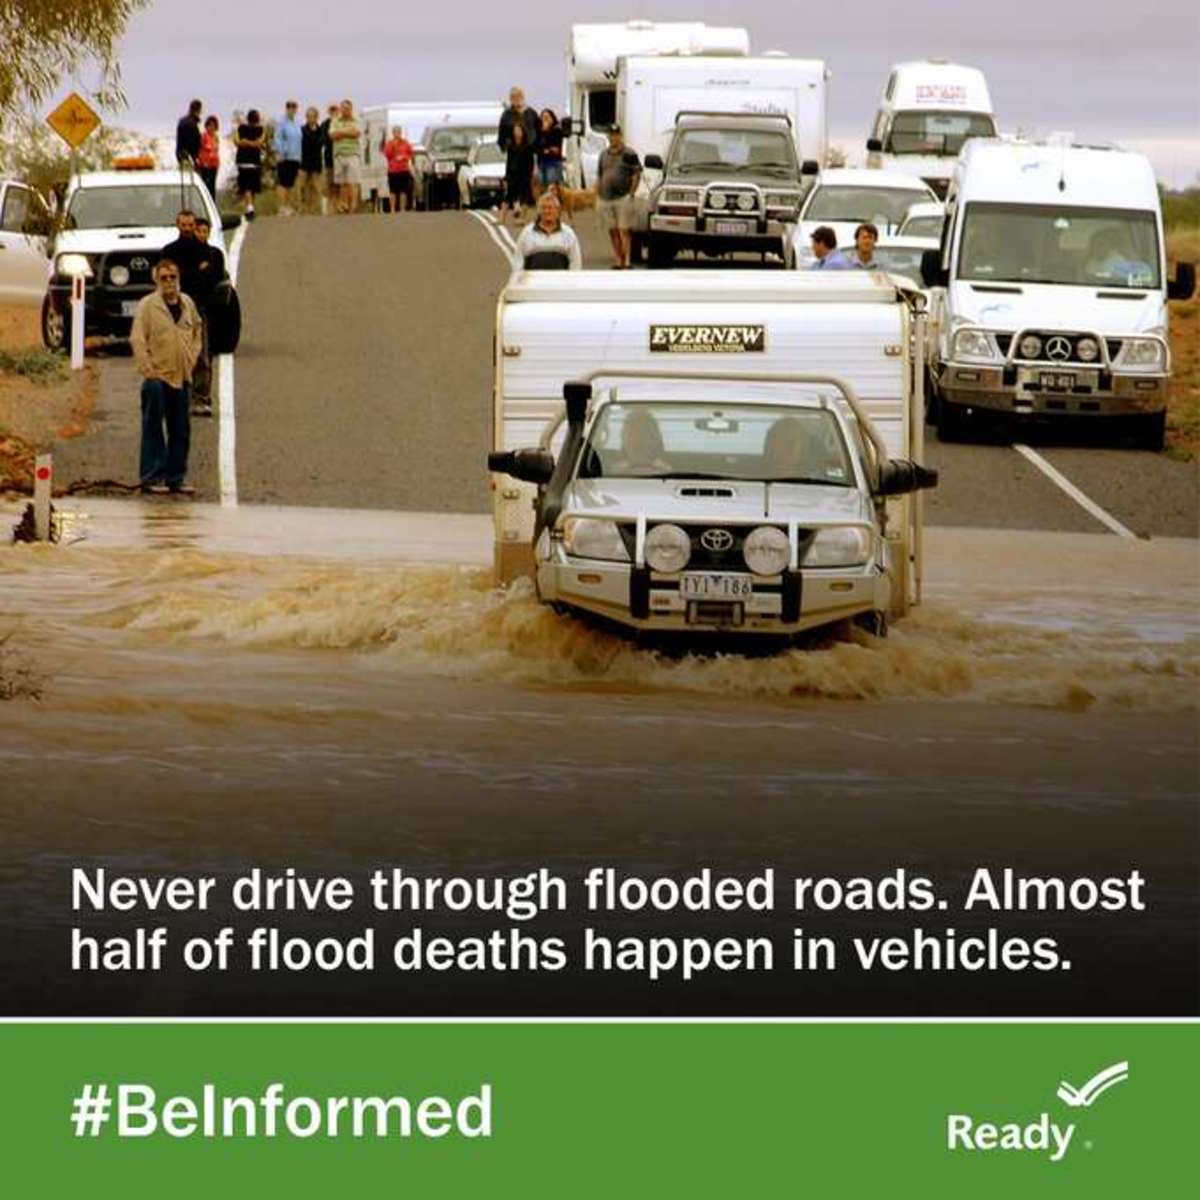 Is Your Municipality Flood Ready?